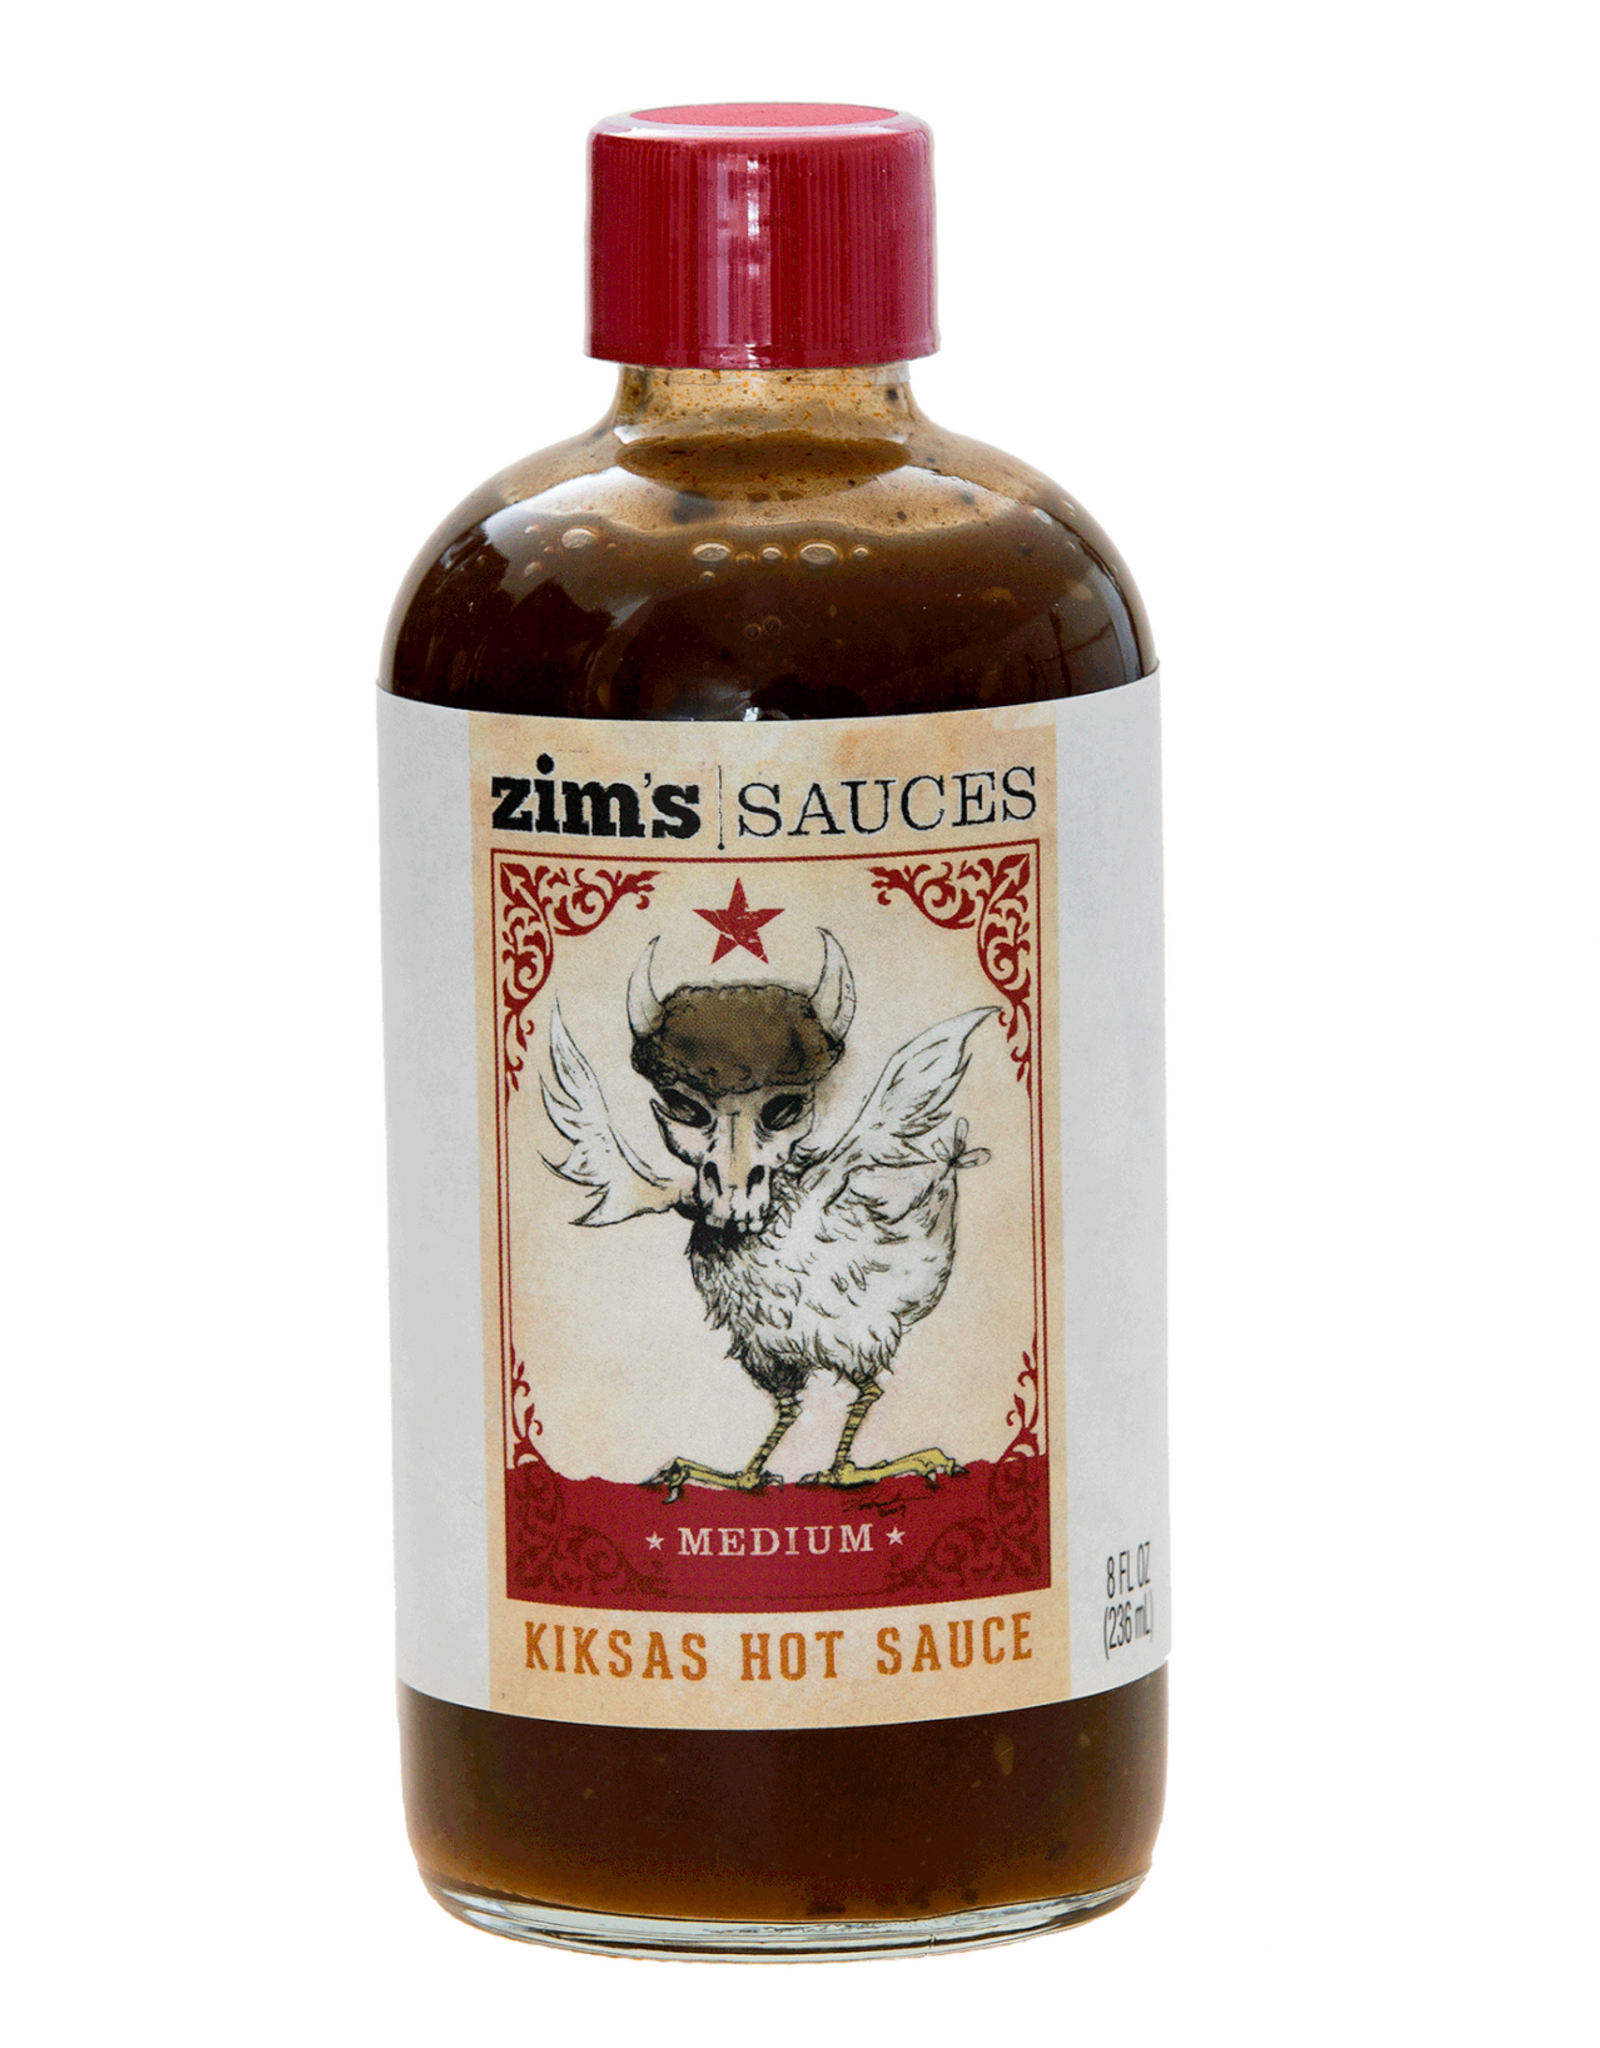 Zim's Sauces Hot Sauces by Zim's